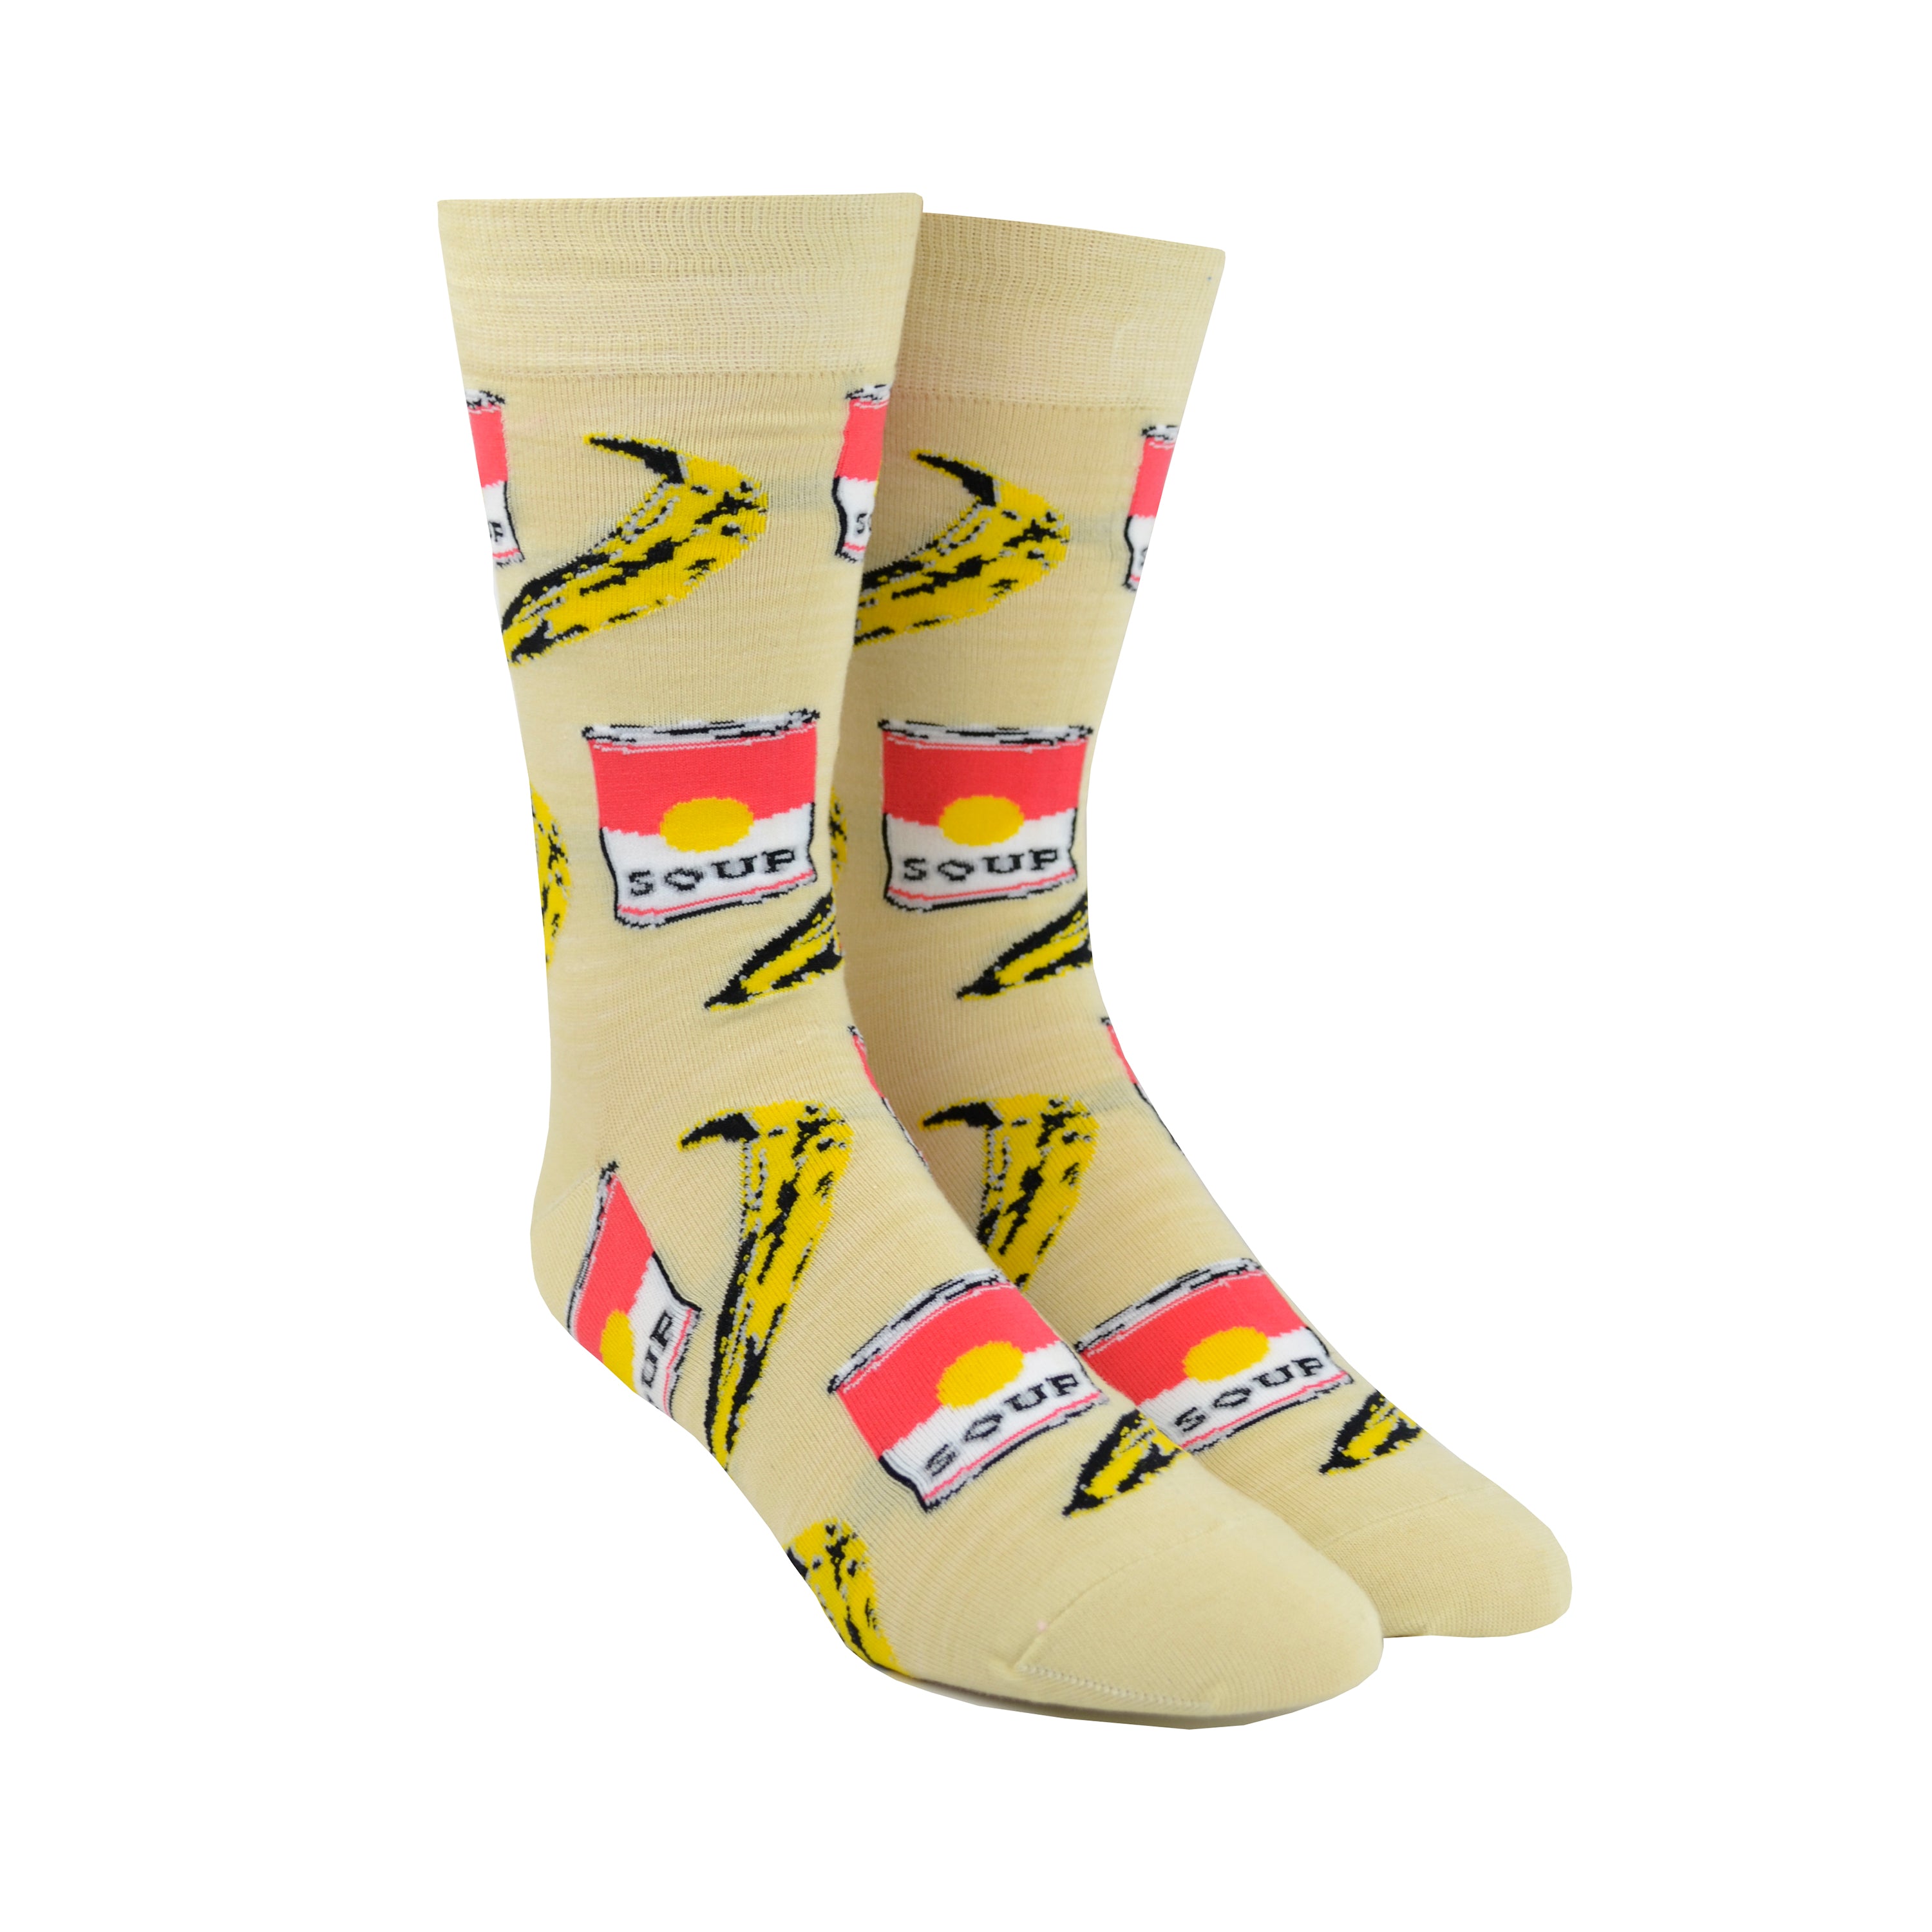 Shown on a foot form, a pair of Yellow Owl Workshop’s tan nylon-cotton men's crew socks with browning bananas and red soup cans